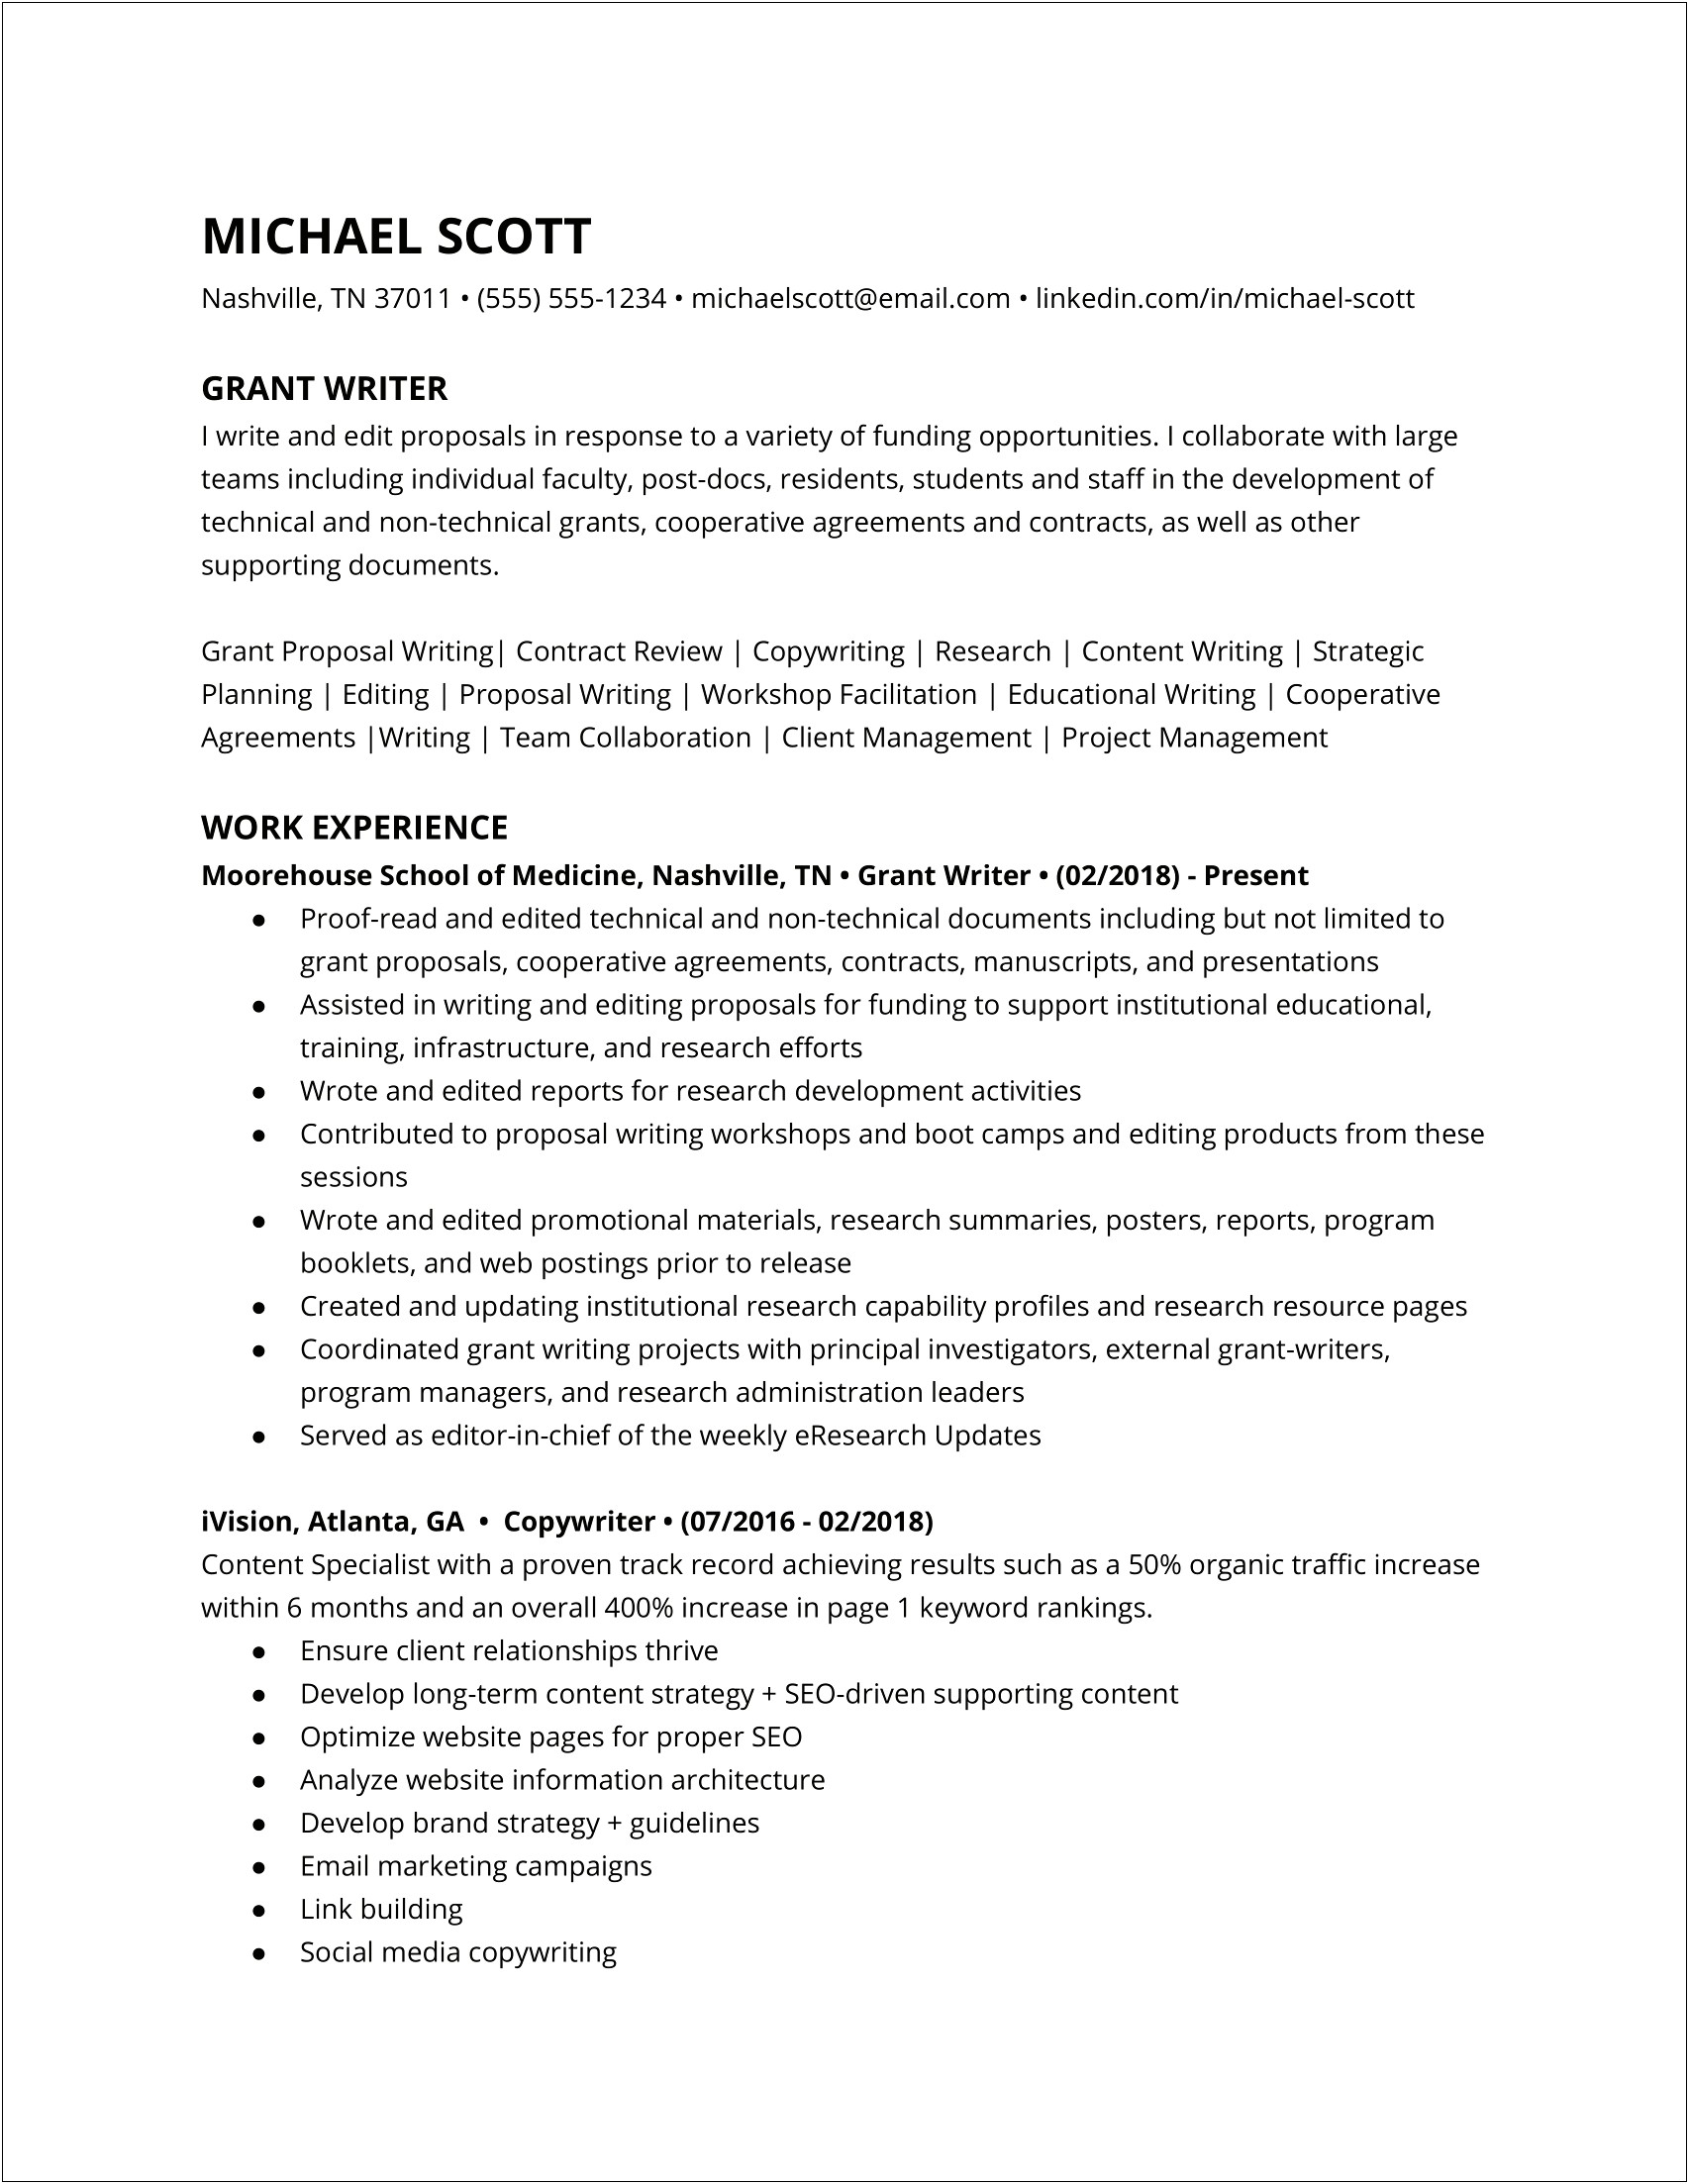 Example Of A Technical Writer Resume